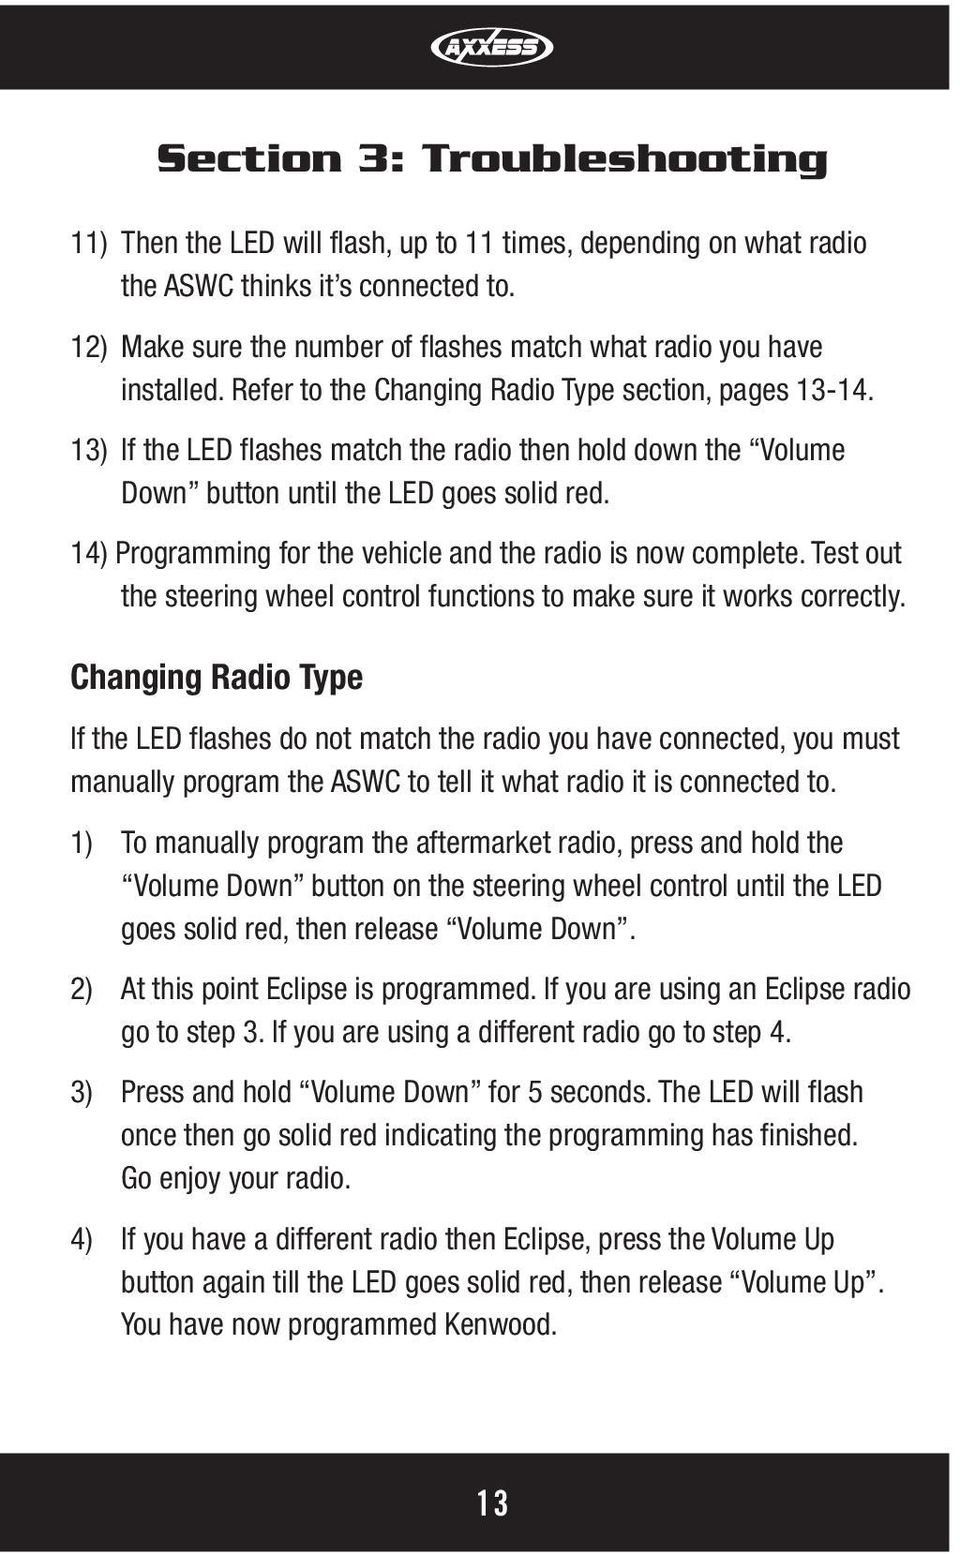 13) If the LED flashes match the radio then hold down the Volume Down button until the LED goes solid red. 14) Programming for the vehicle and the radio is now complete.